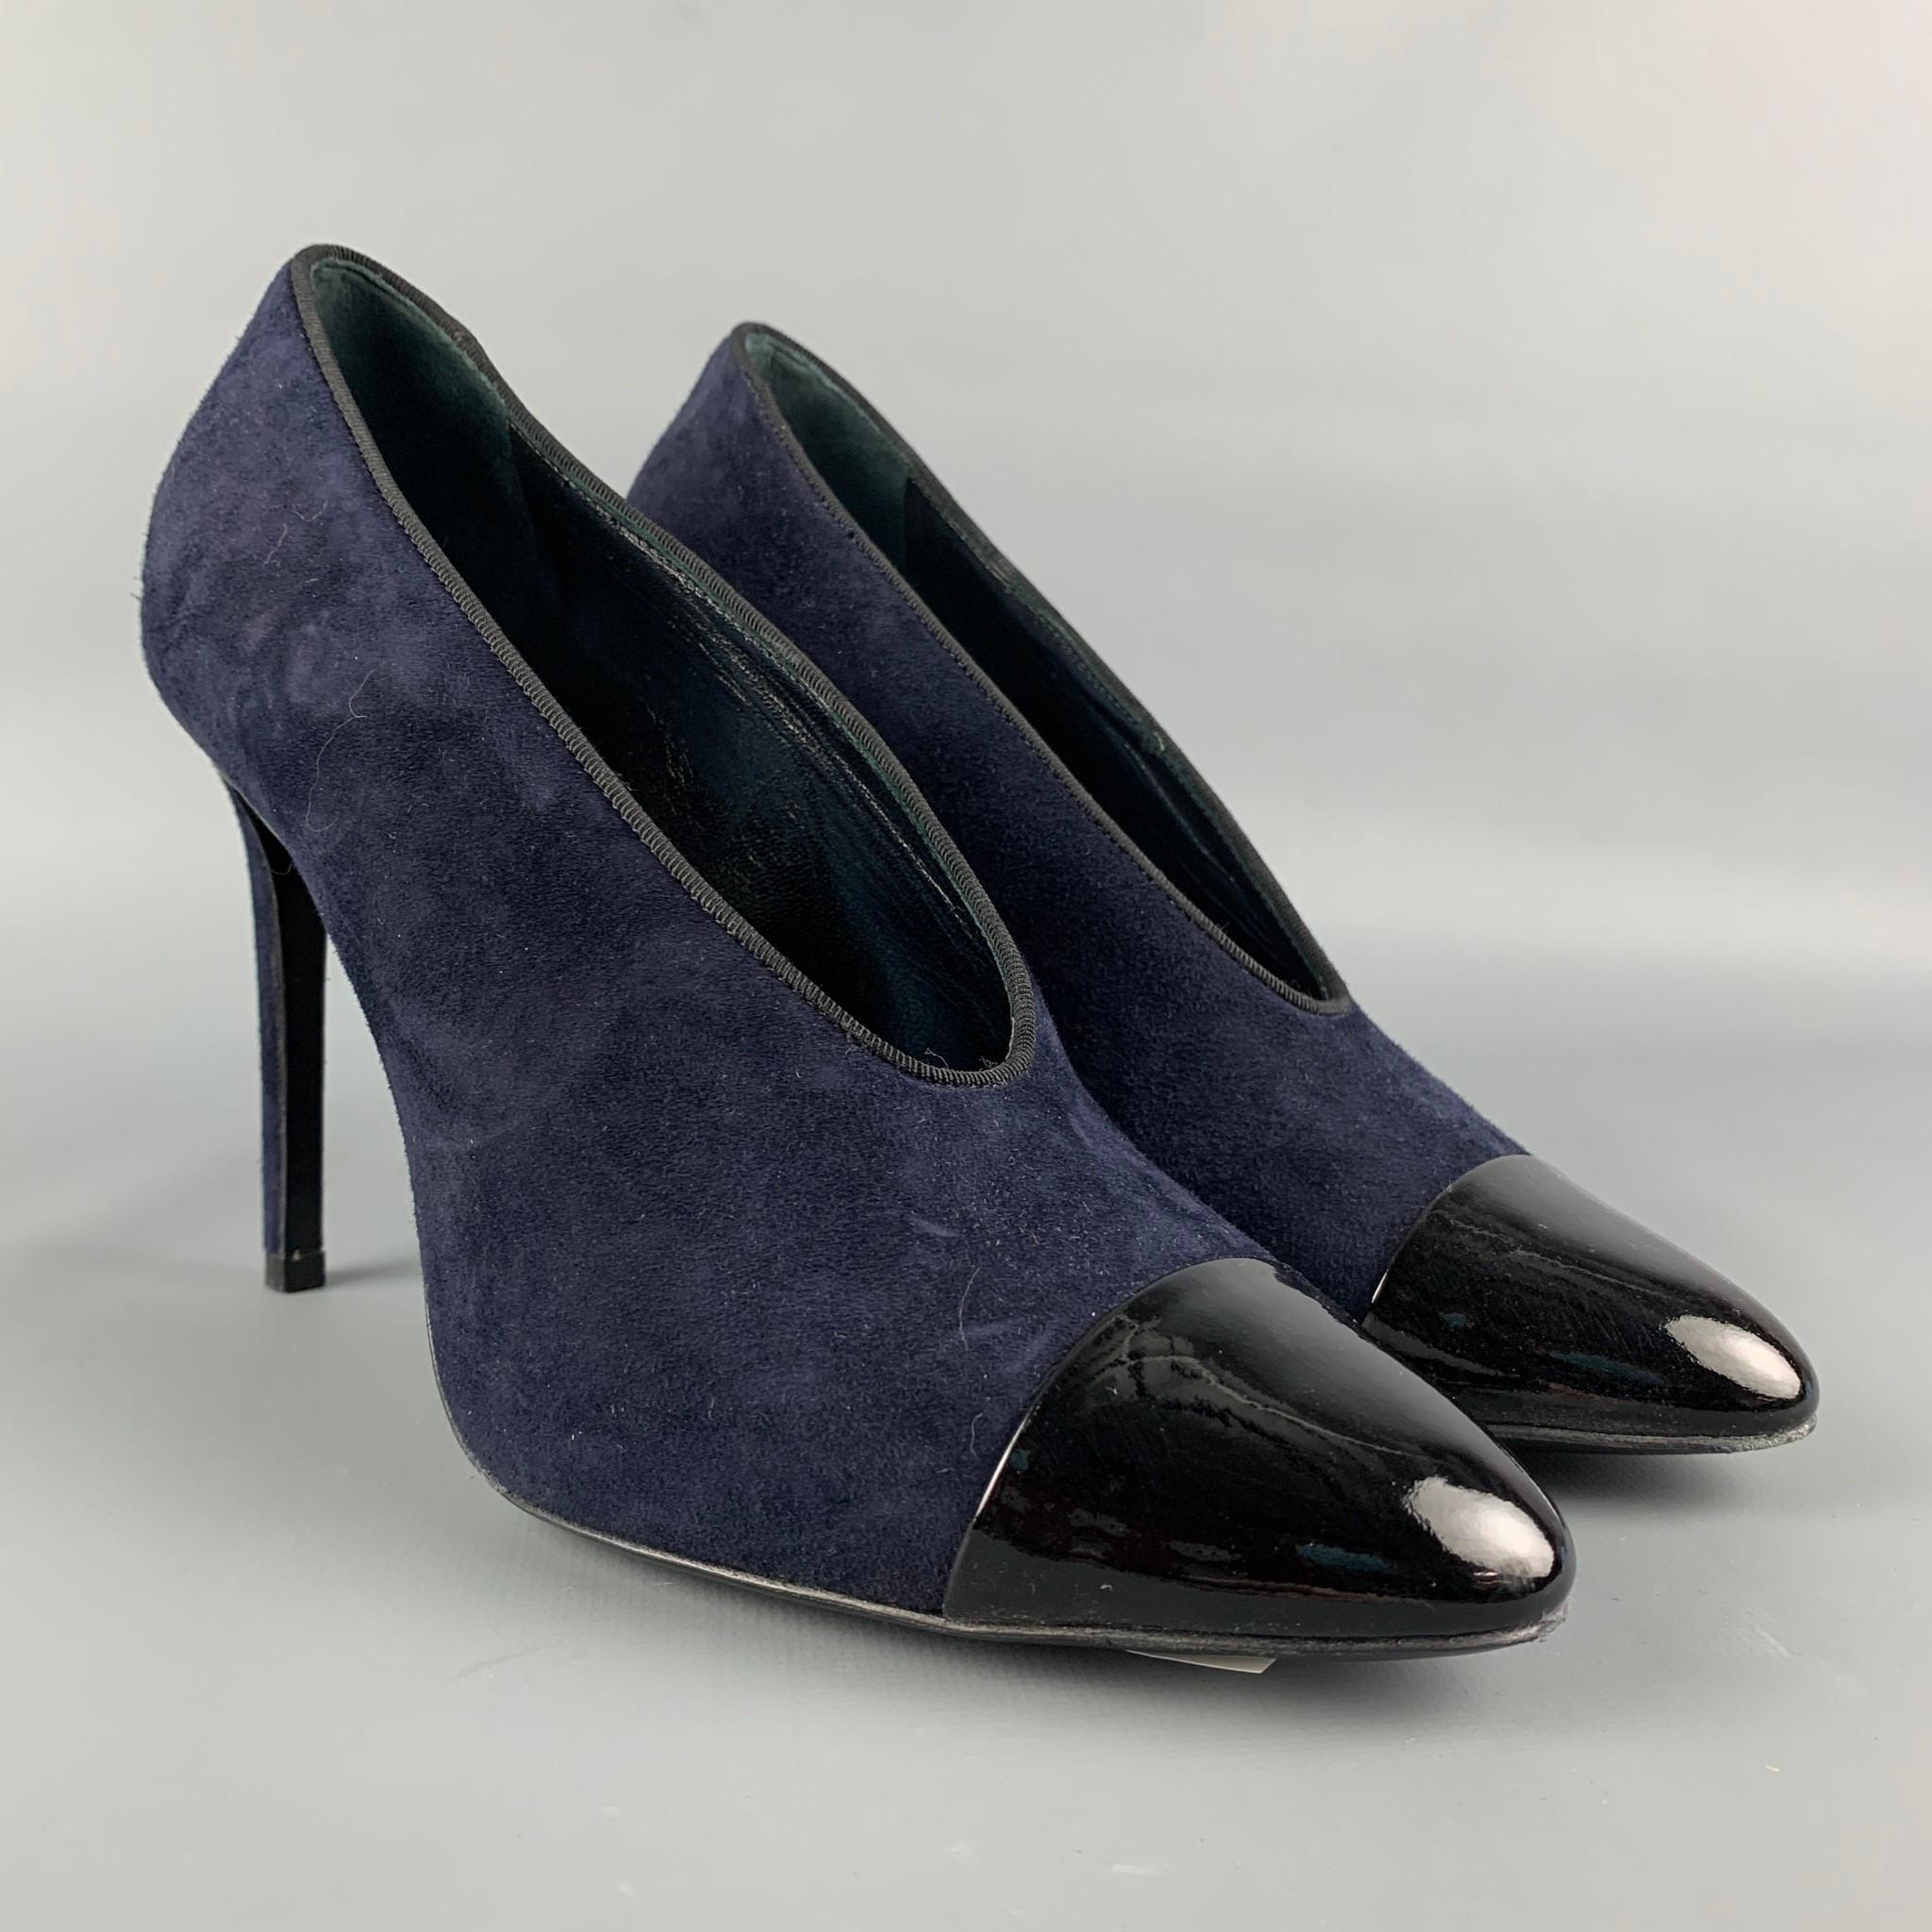 LANVIN pumps comes in a navy suede featuring a black patent leather cap toe an a stiletto heel. Comes with box. Made in Italy.

Very Good Pre-Owned Condition.
Marked: 38
Original Retail Price: $775.00

Measurements:

Heel: 4 in.
 